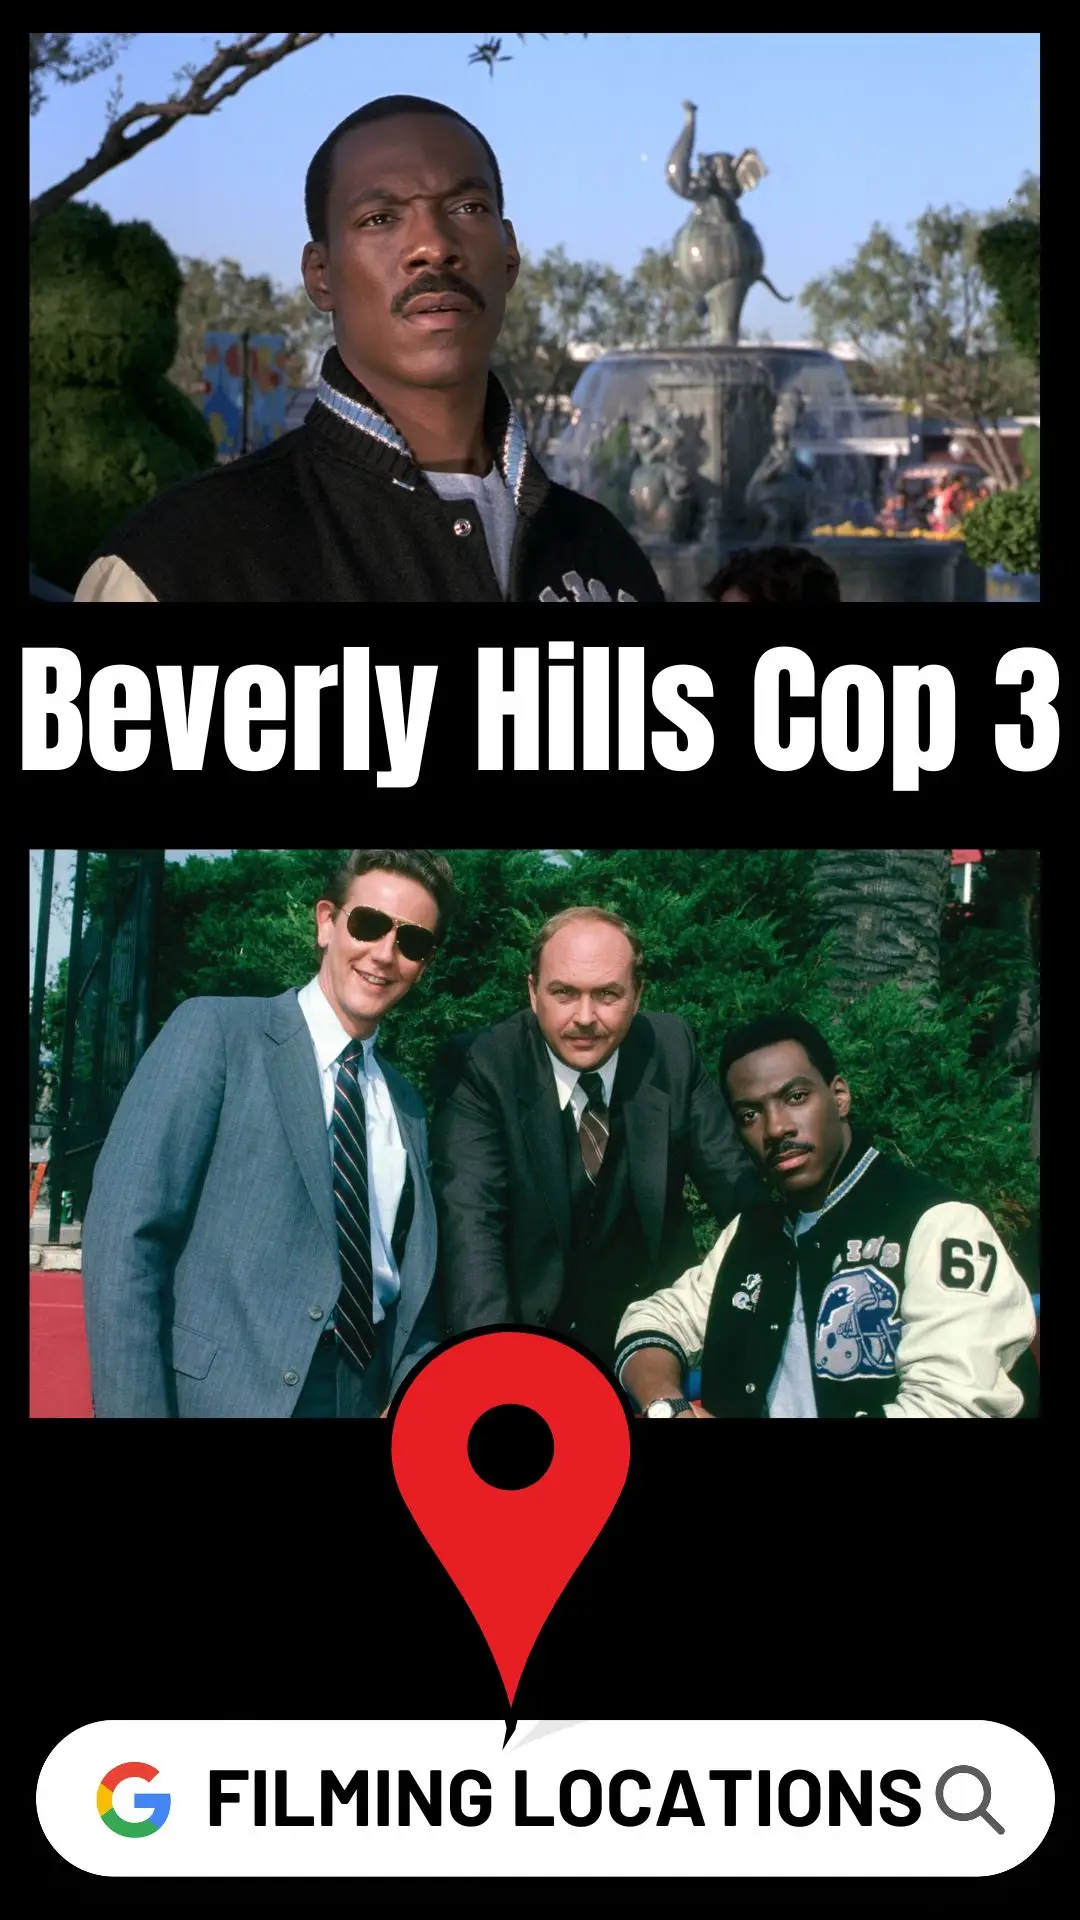 Beverly Hills Cop 3 Filming Locations